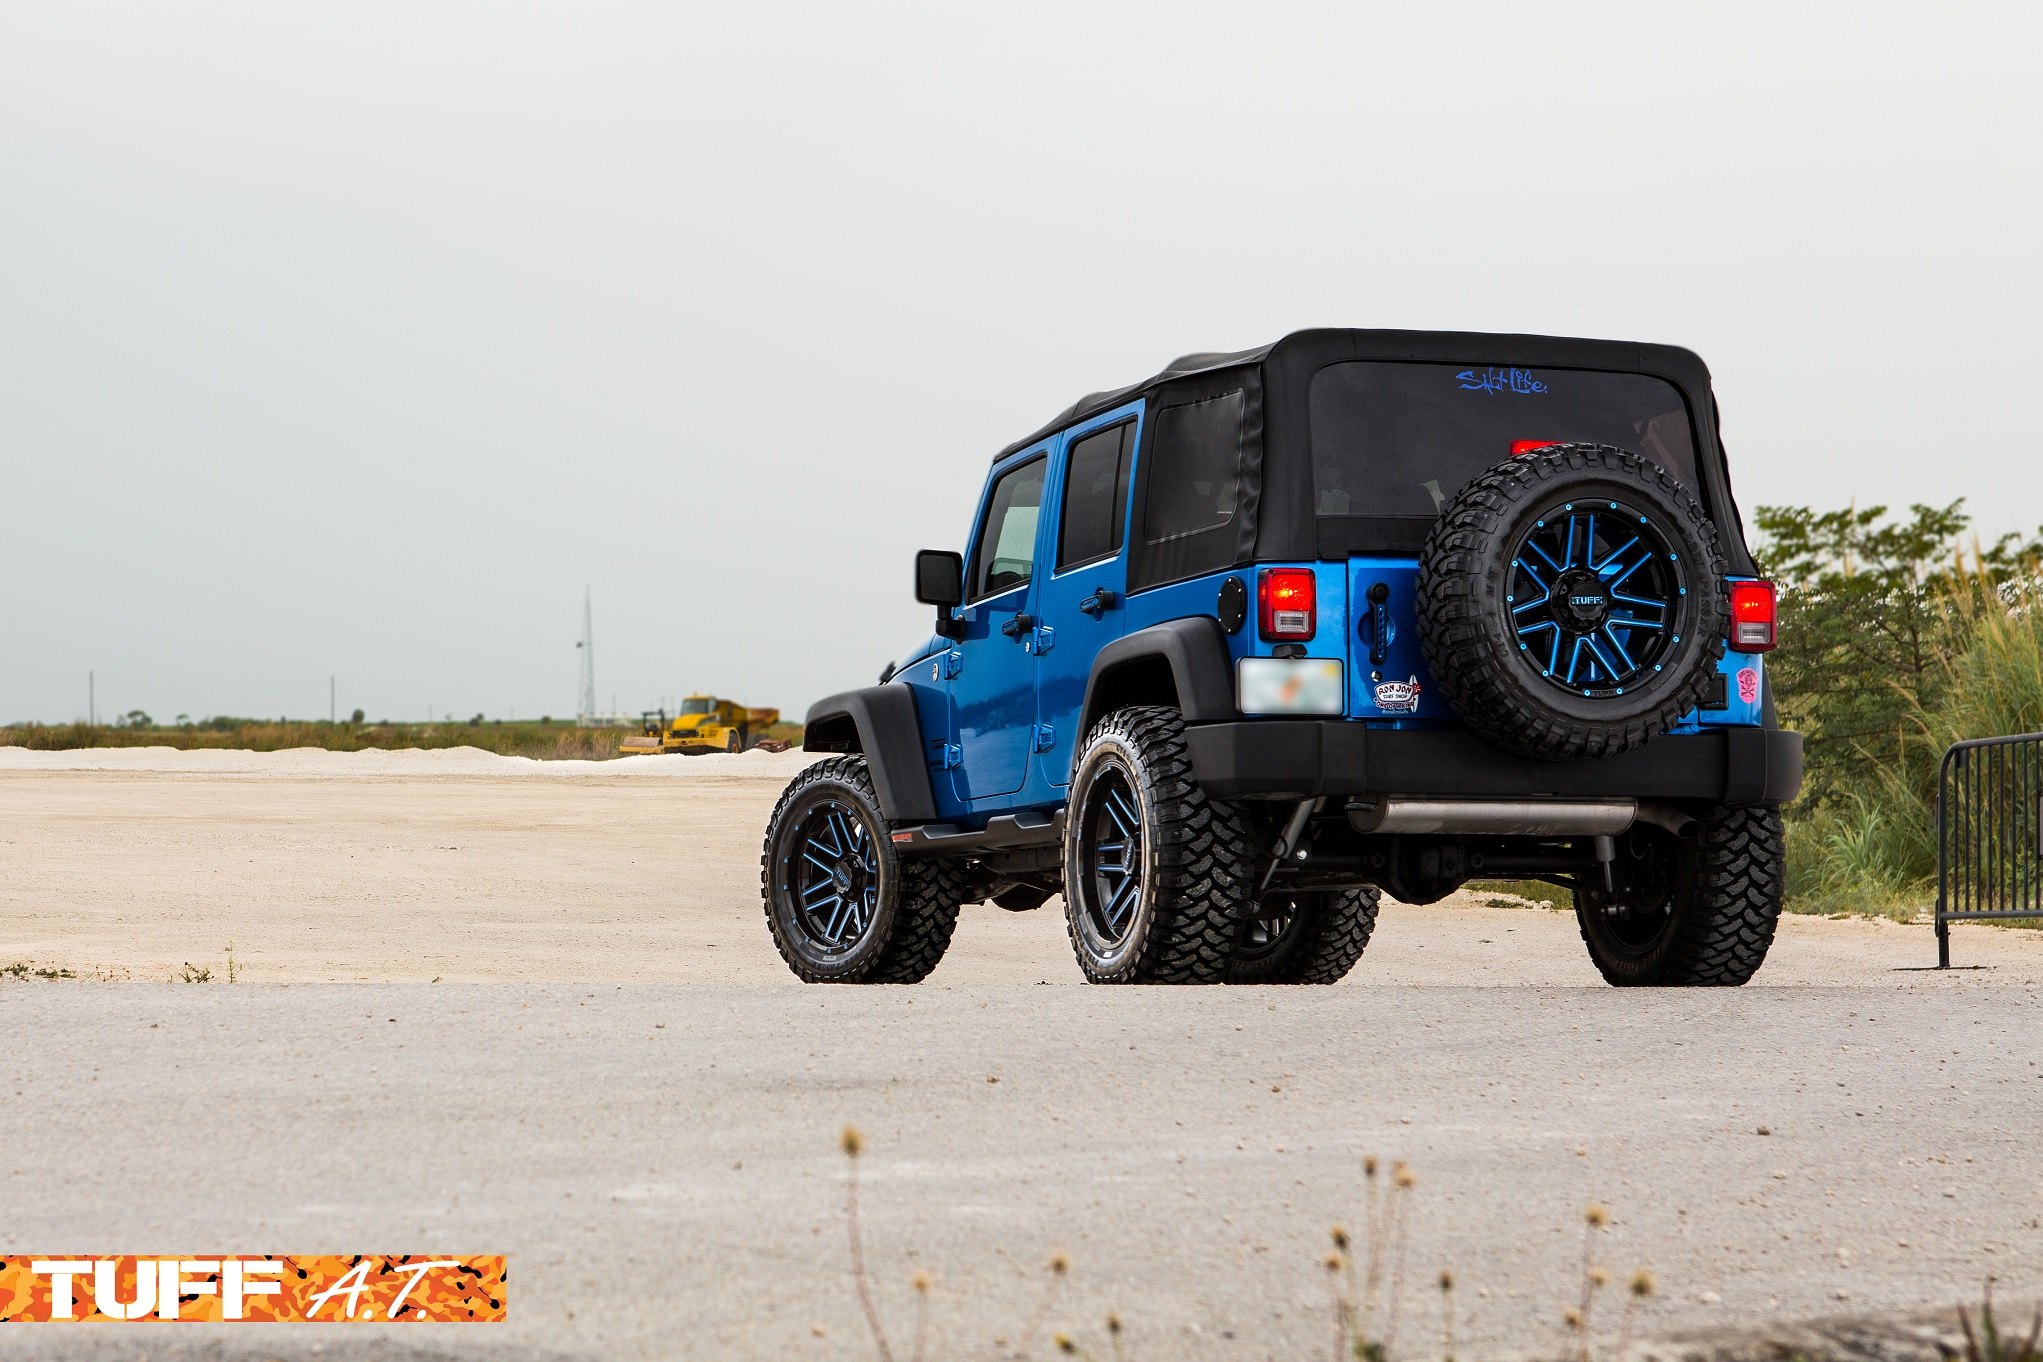 Jeep Wrangler JK lifted on 35 inch mud tires - Photo by Tuff